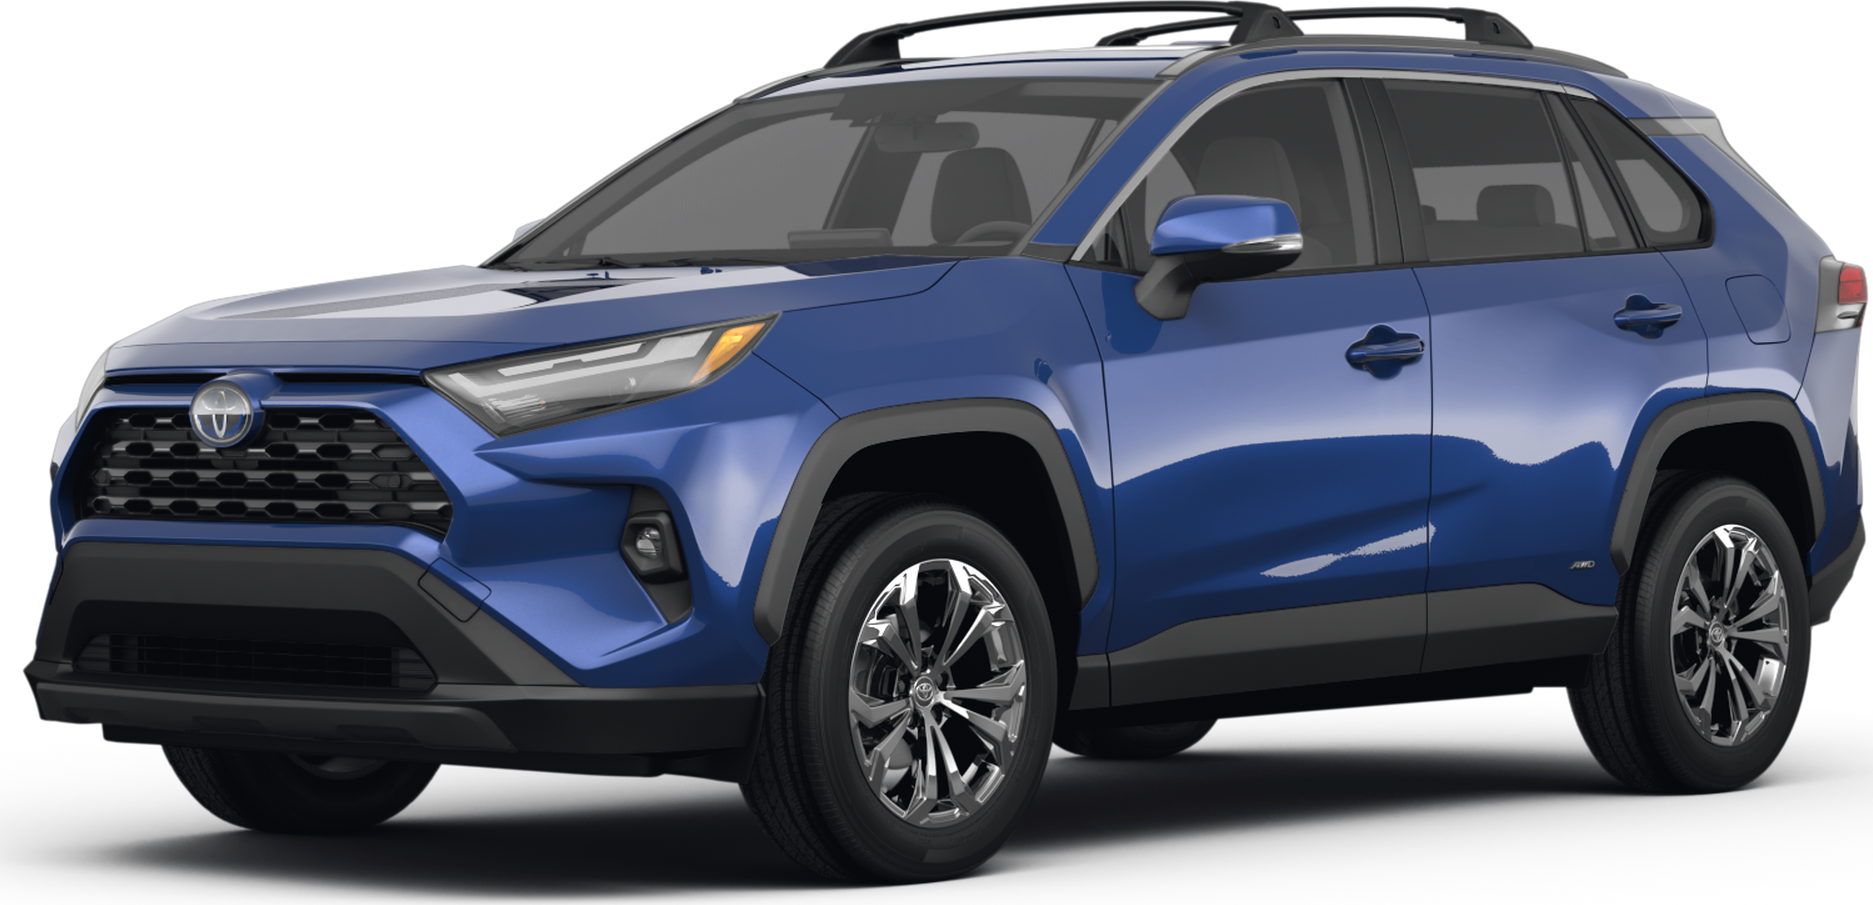 Toyota Cars, Trucks and SUVs: Latest Prices, Reviews, Specs and Photos